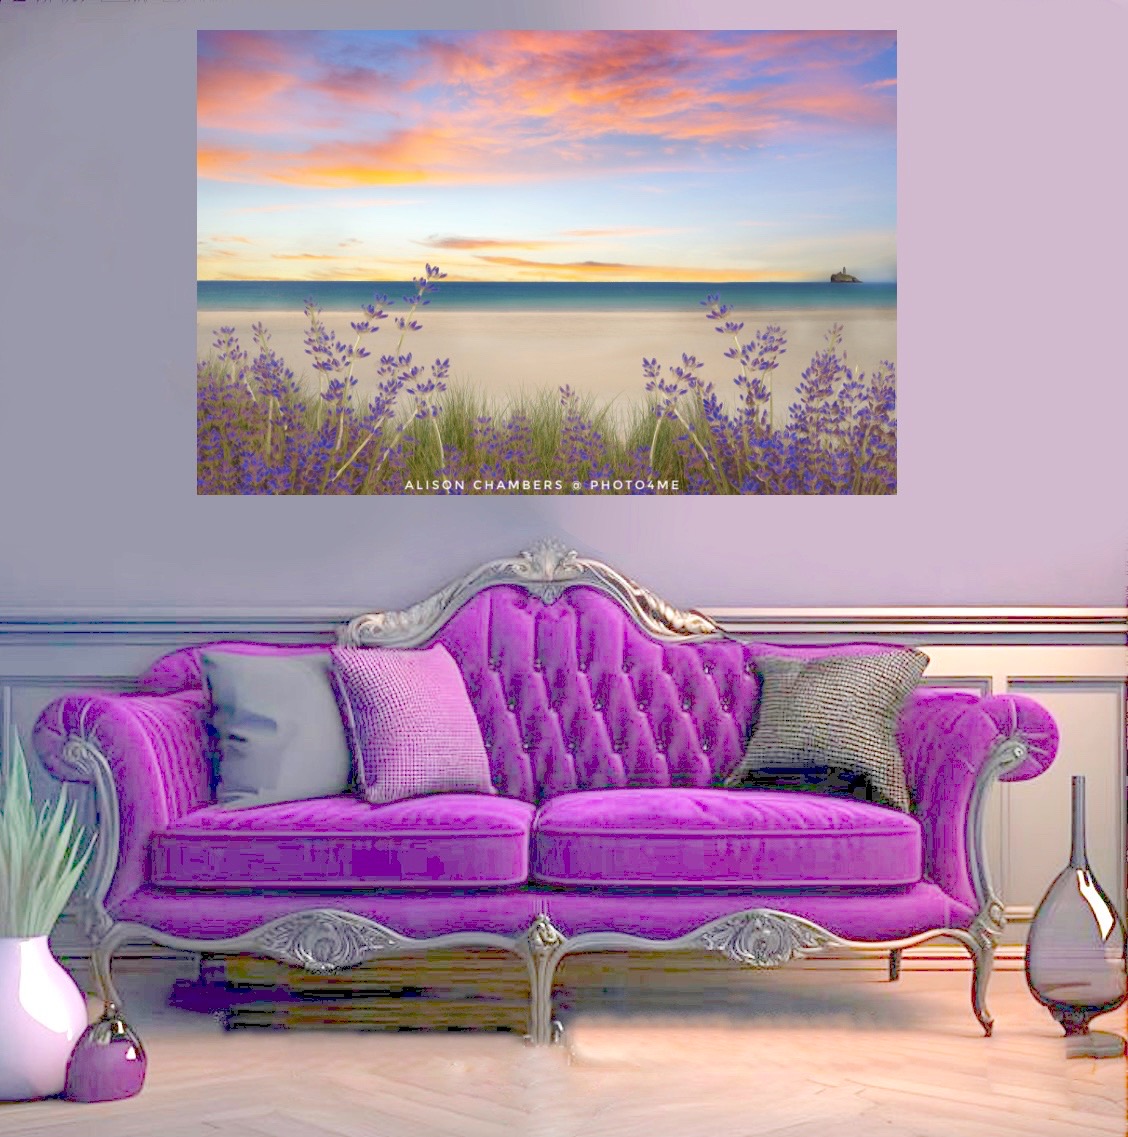 Cornwall. Available from; shop.photo4me.com/1322066 & alisonchambers2.redbubble.com & 2-alison-chambers.pixels.com #cornwallcoast #cornishcoast #cornishbeach #cornishart #cornwallart